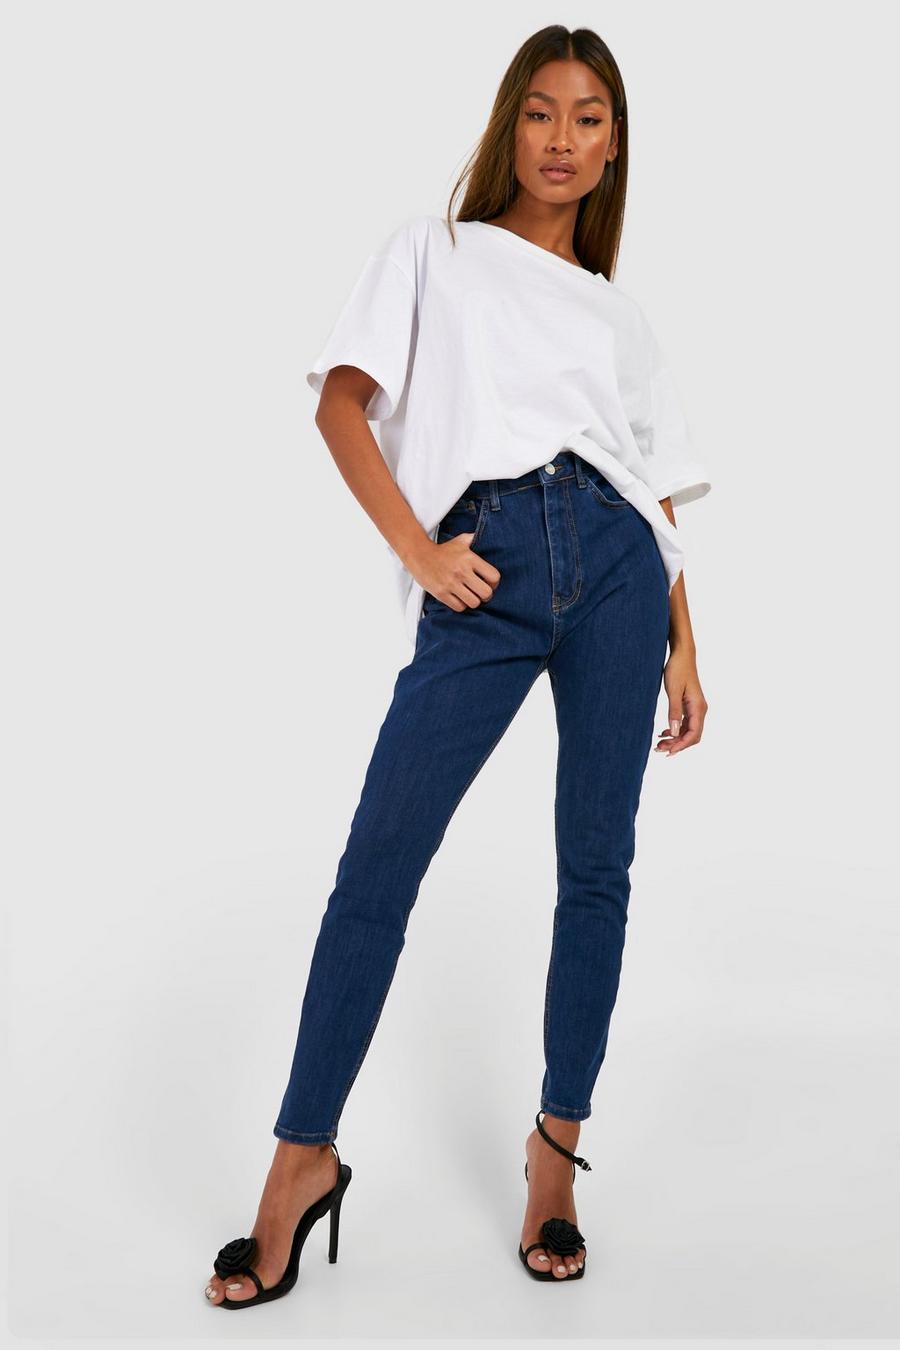 Indigo blue Mid Rise Booty Shaping Skinny Jeans